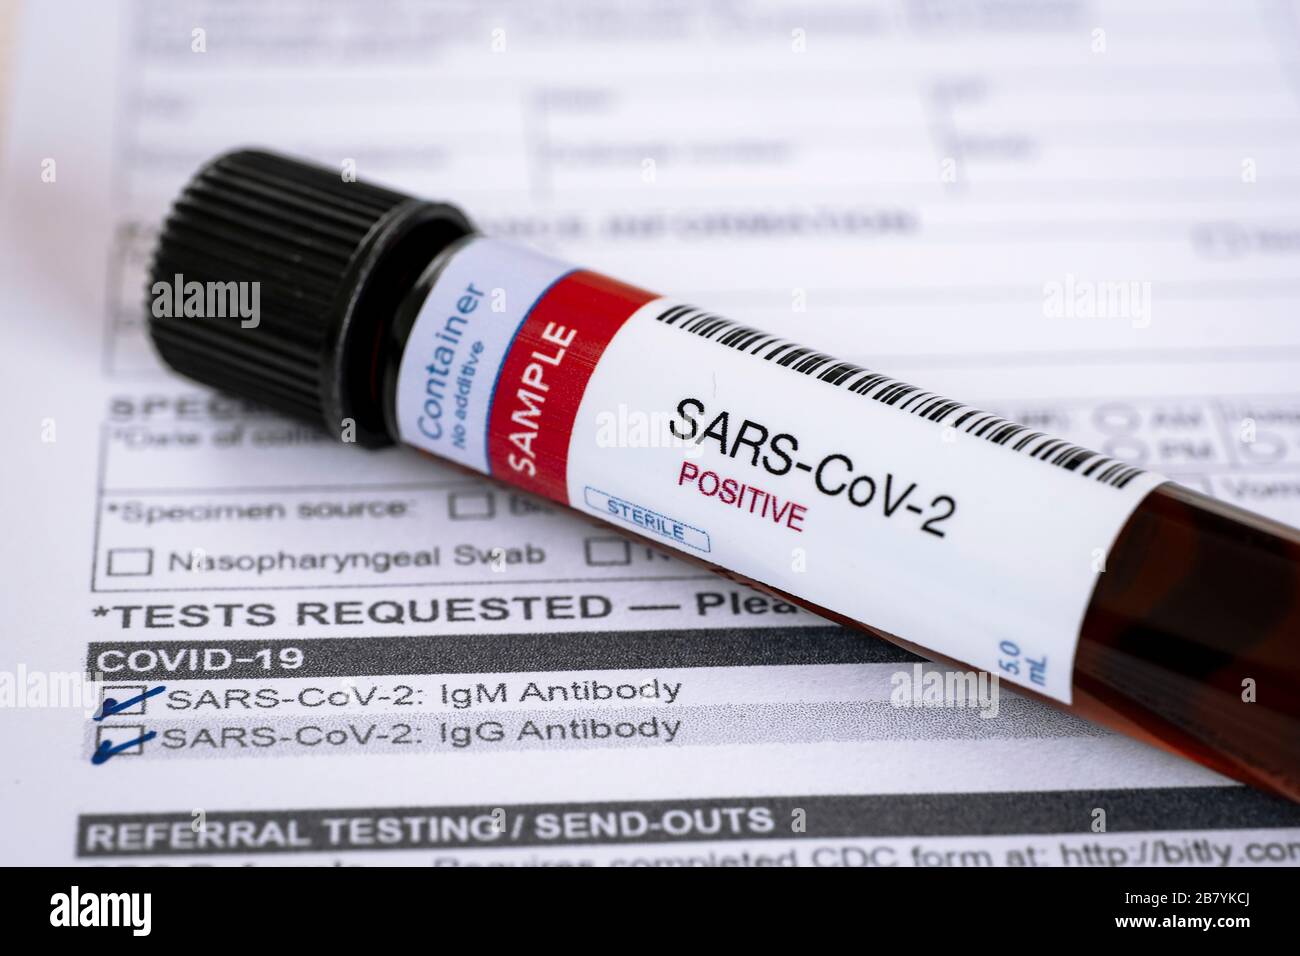 Testing for presence of coronavirus. Tube containing a blood sample that has tested positive for COVID-19. Test form in the background. Stock Photo